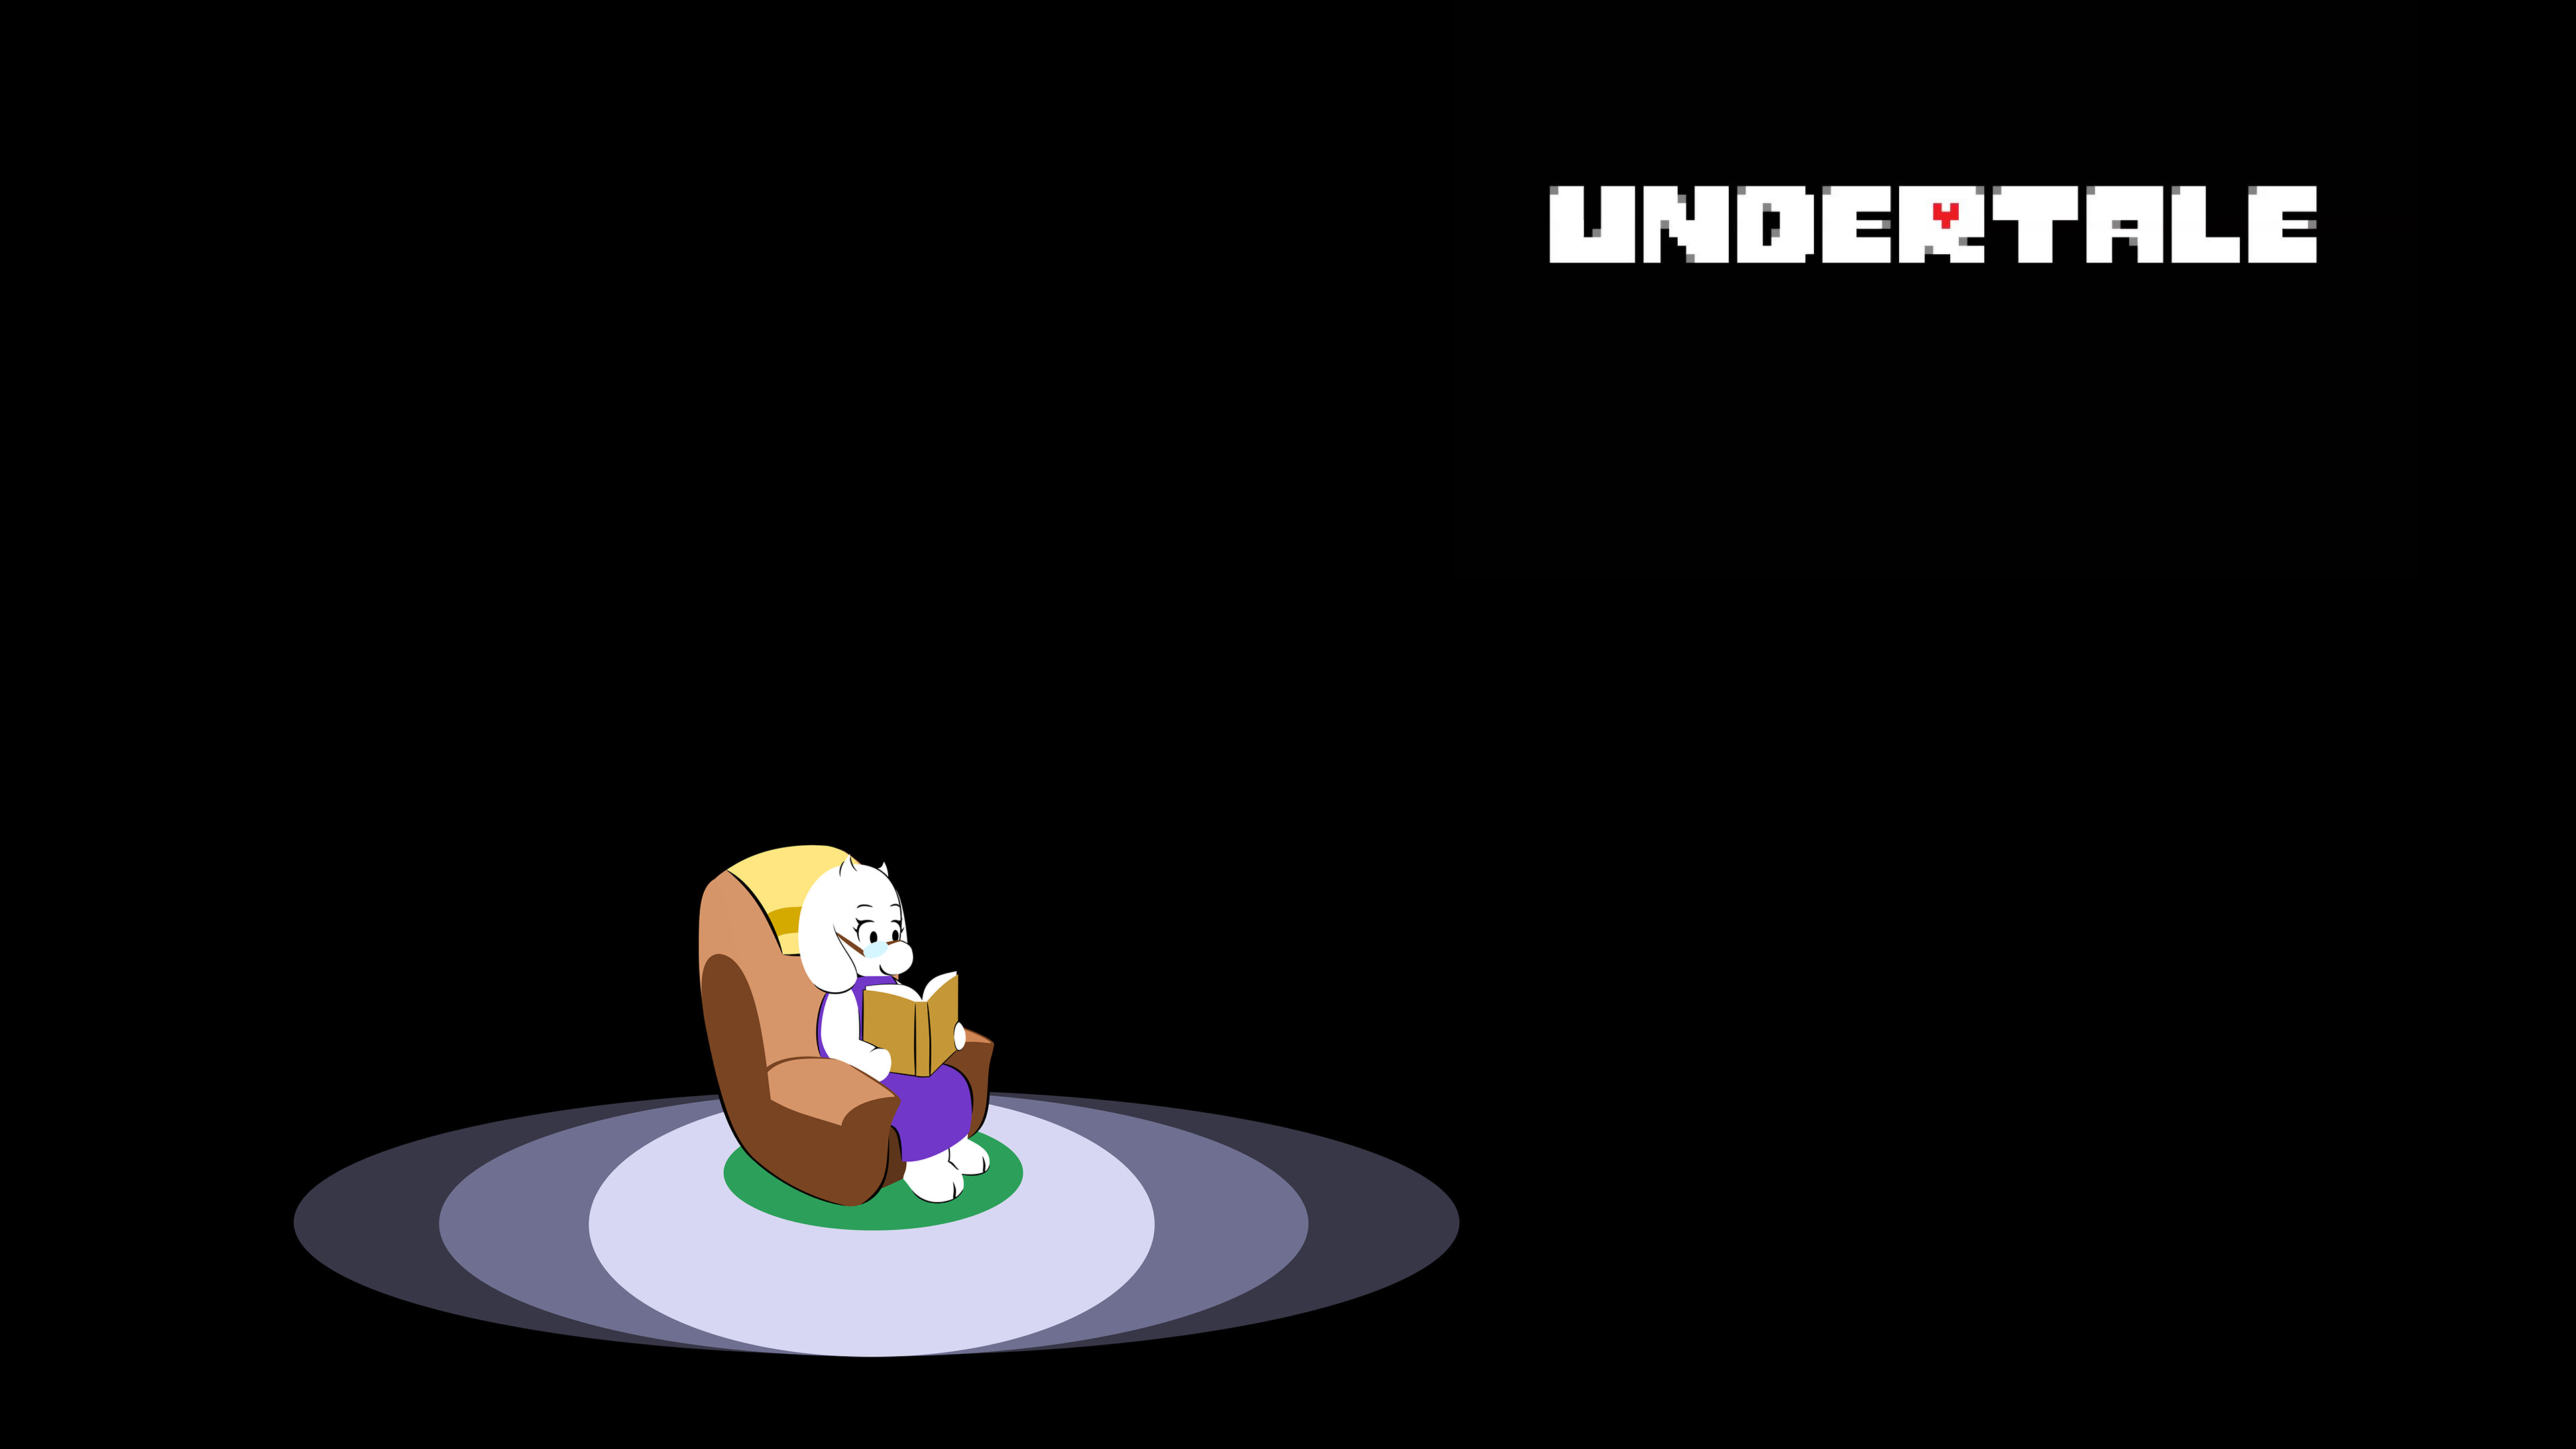 3840x2160 Undertale Wallpaper Wide Collections